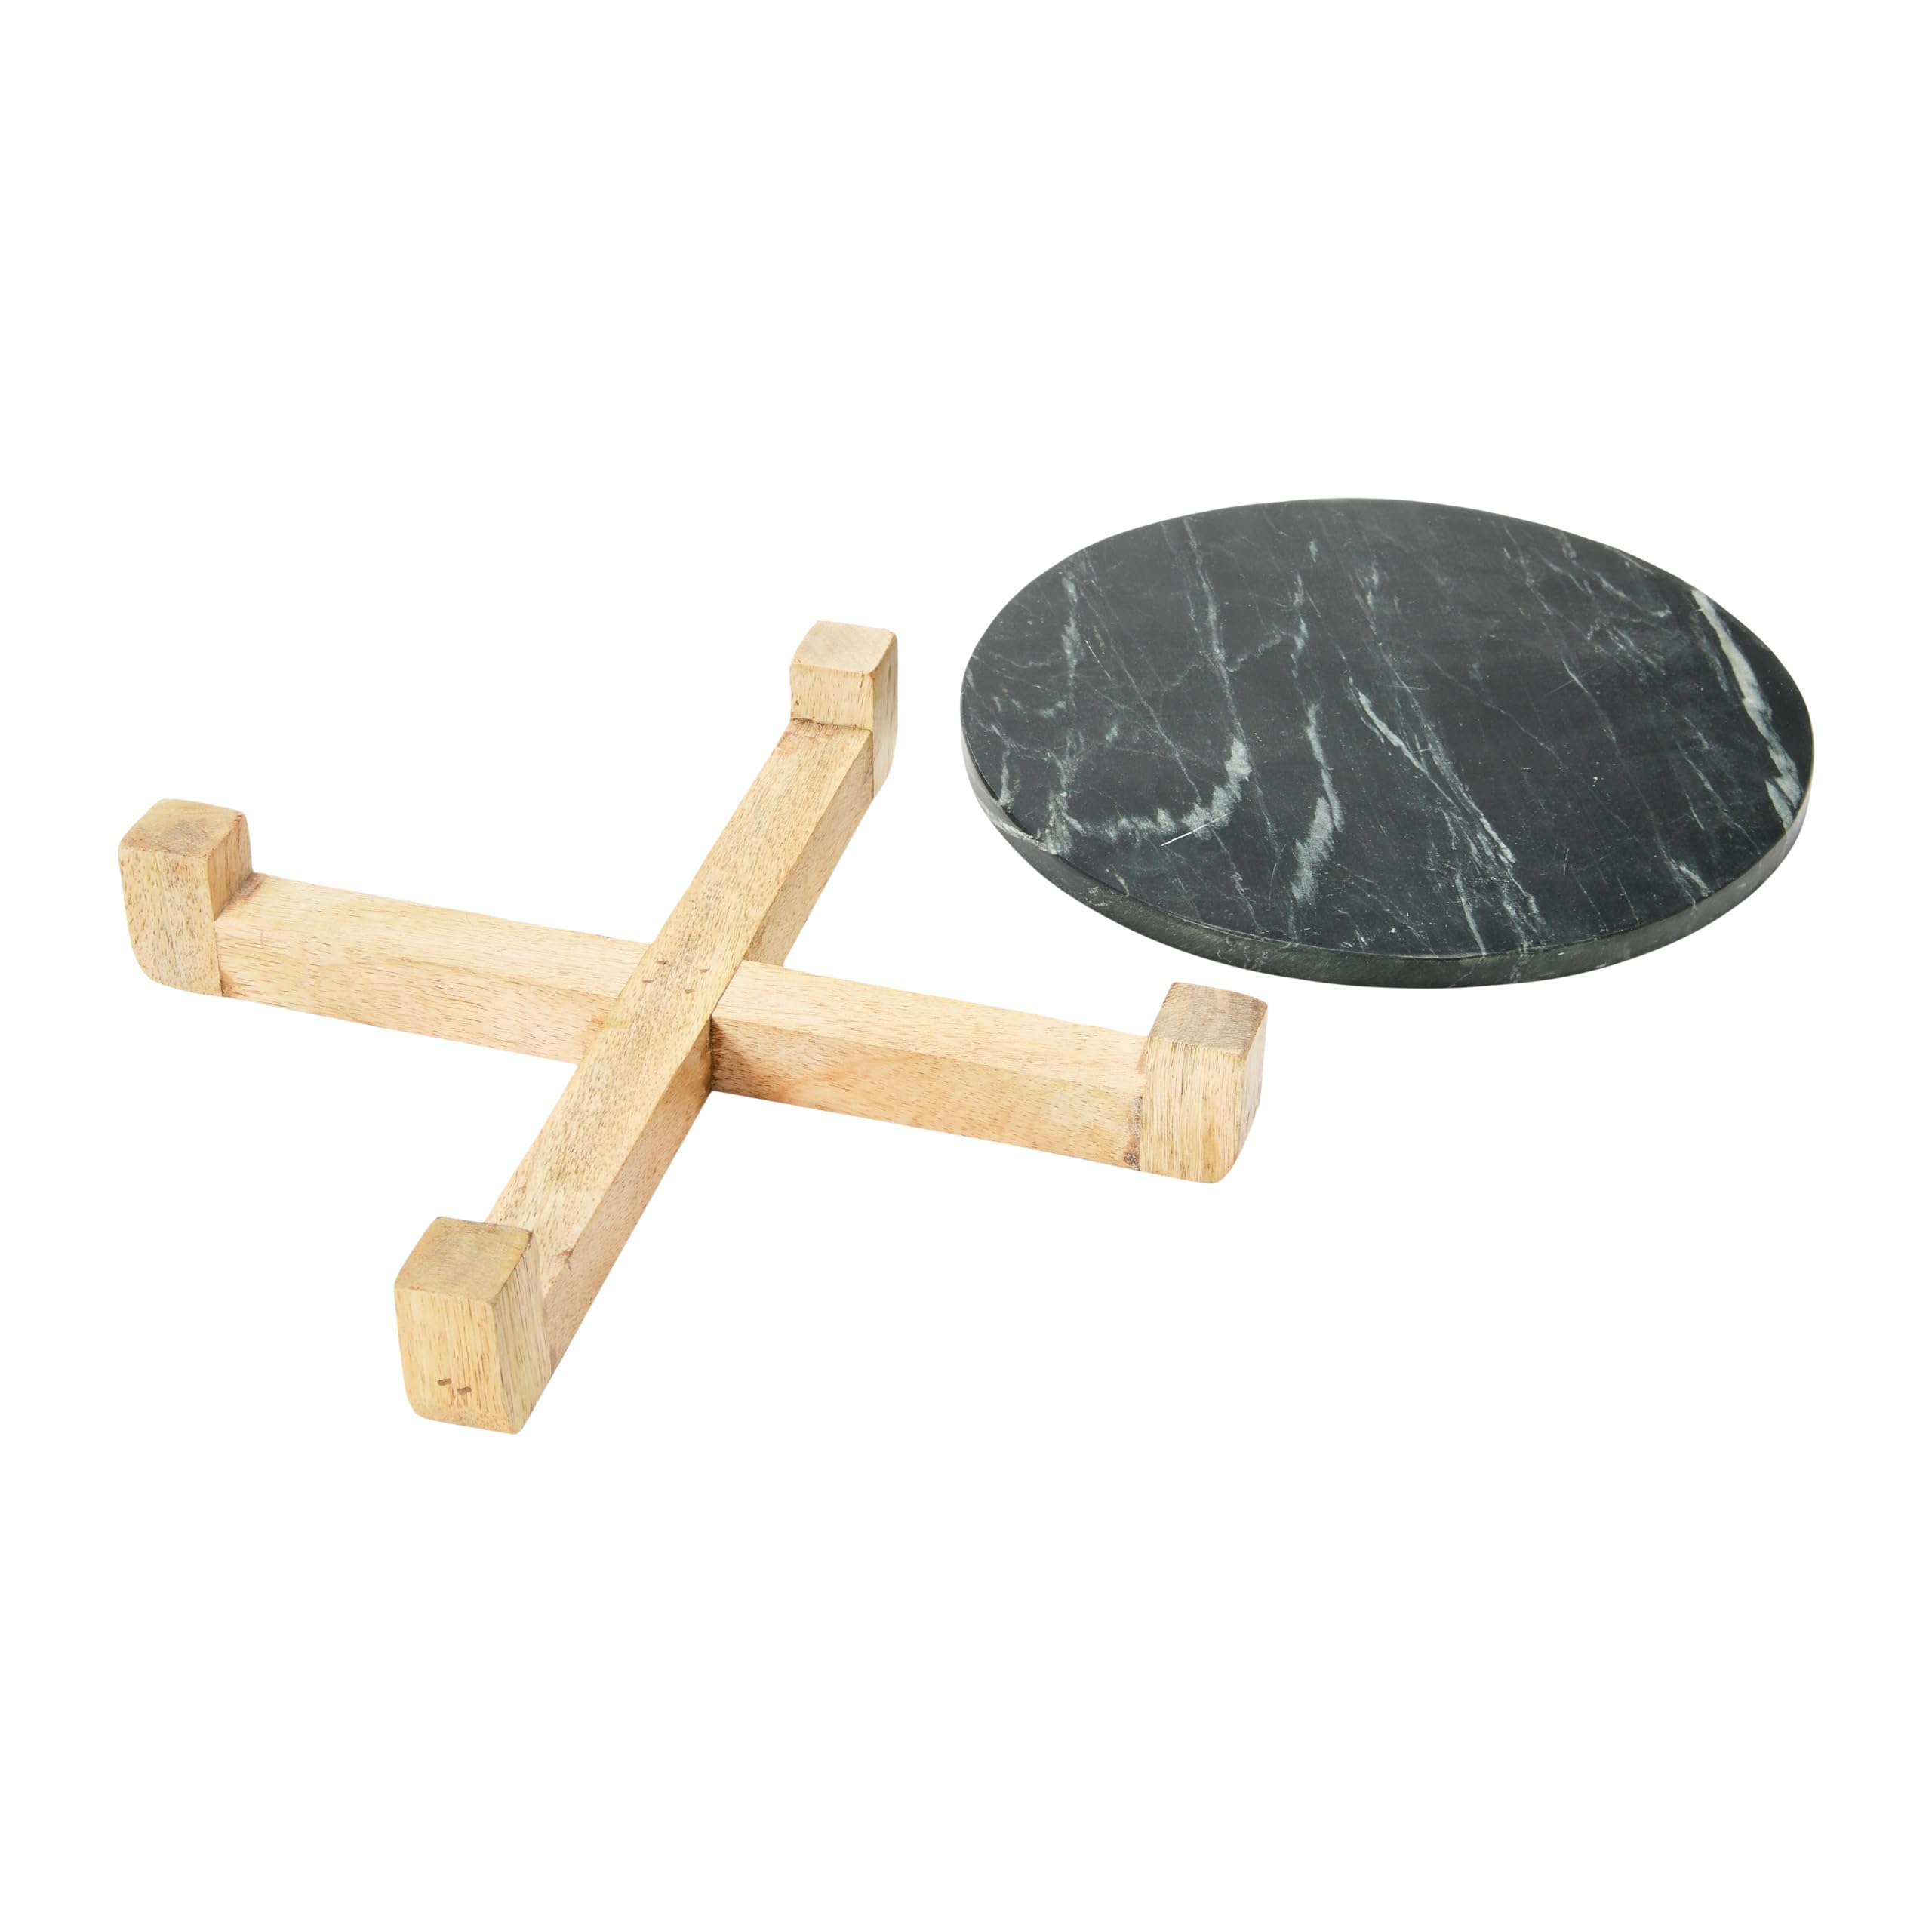 Bloomingville Marble Serving Board with Mango Wood Stand, Black & Natural Platter, 13", Grey